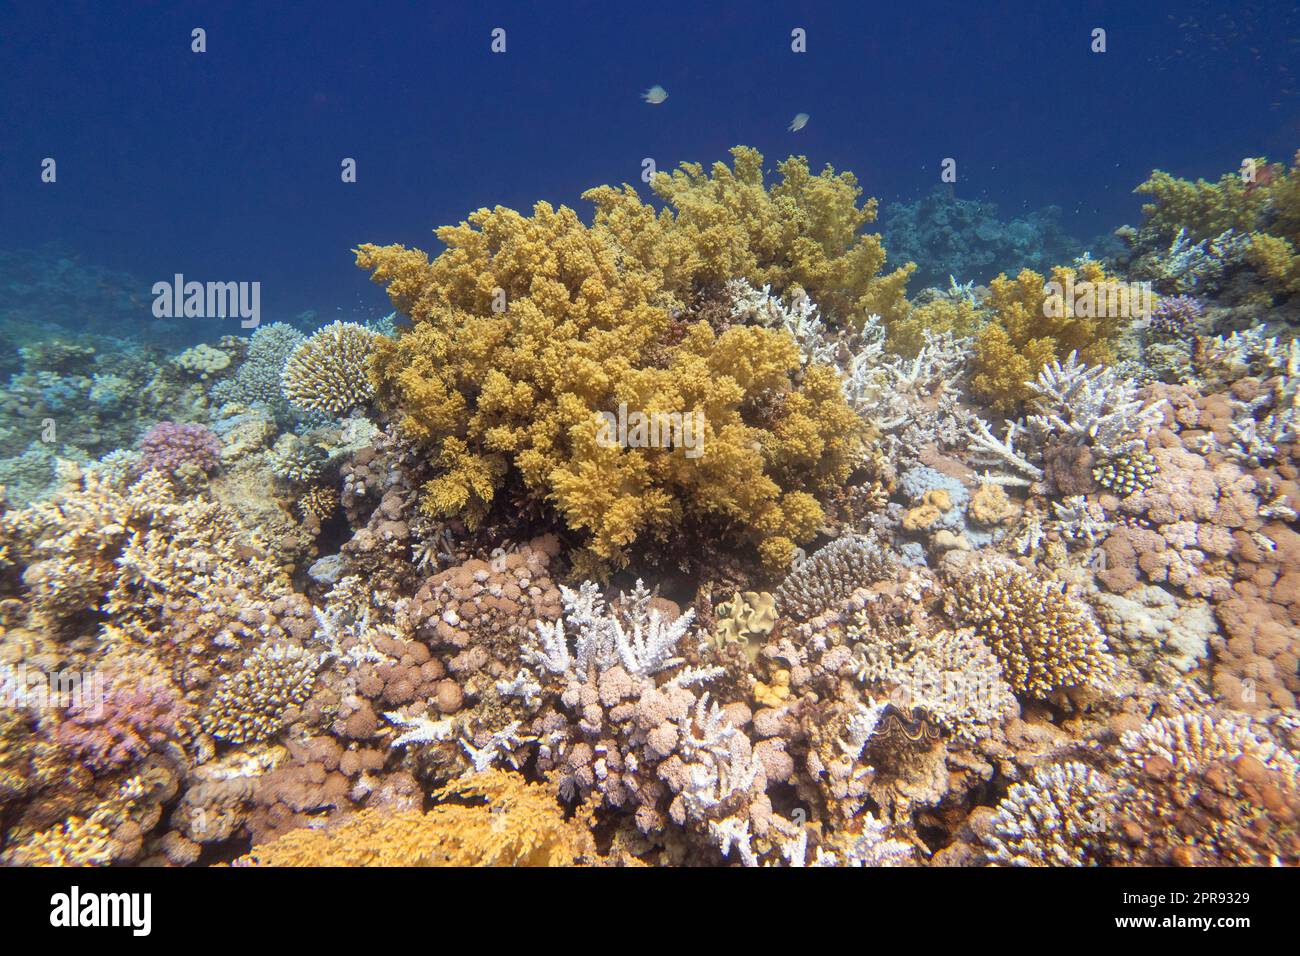 Colorful, picturesque coral reef at bottom of tropical sea, yellow broccoli coral, underwater landscape Stock Photo